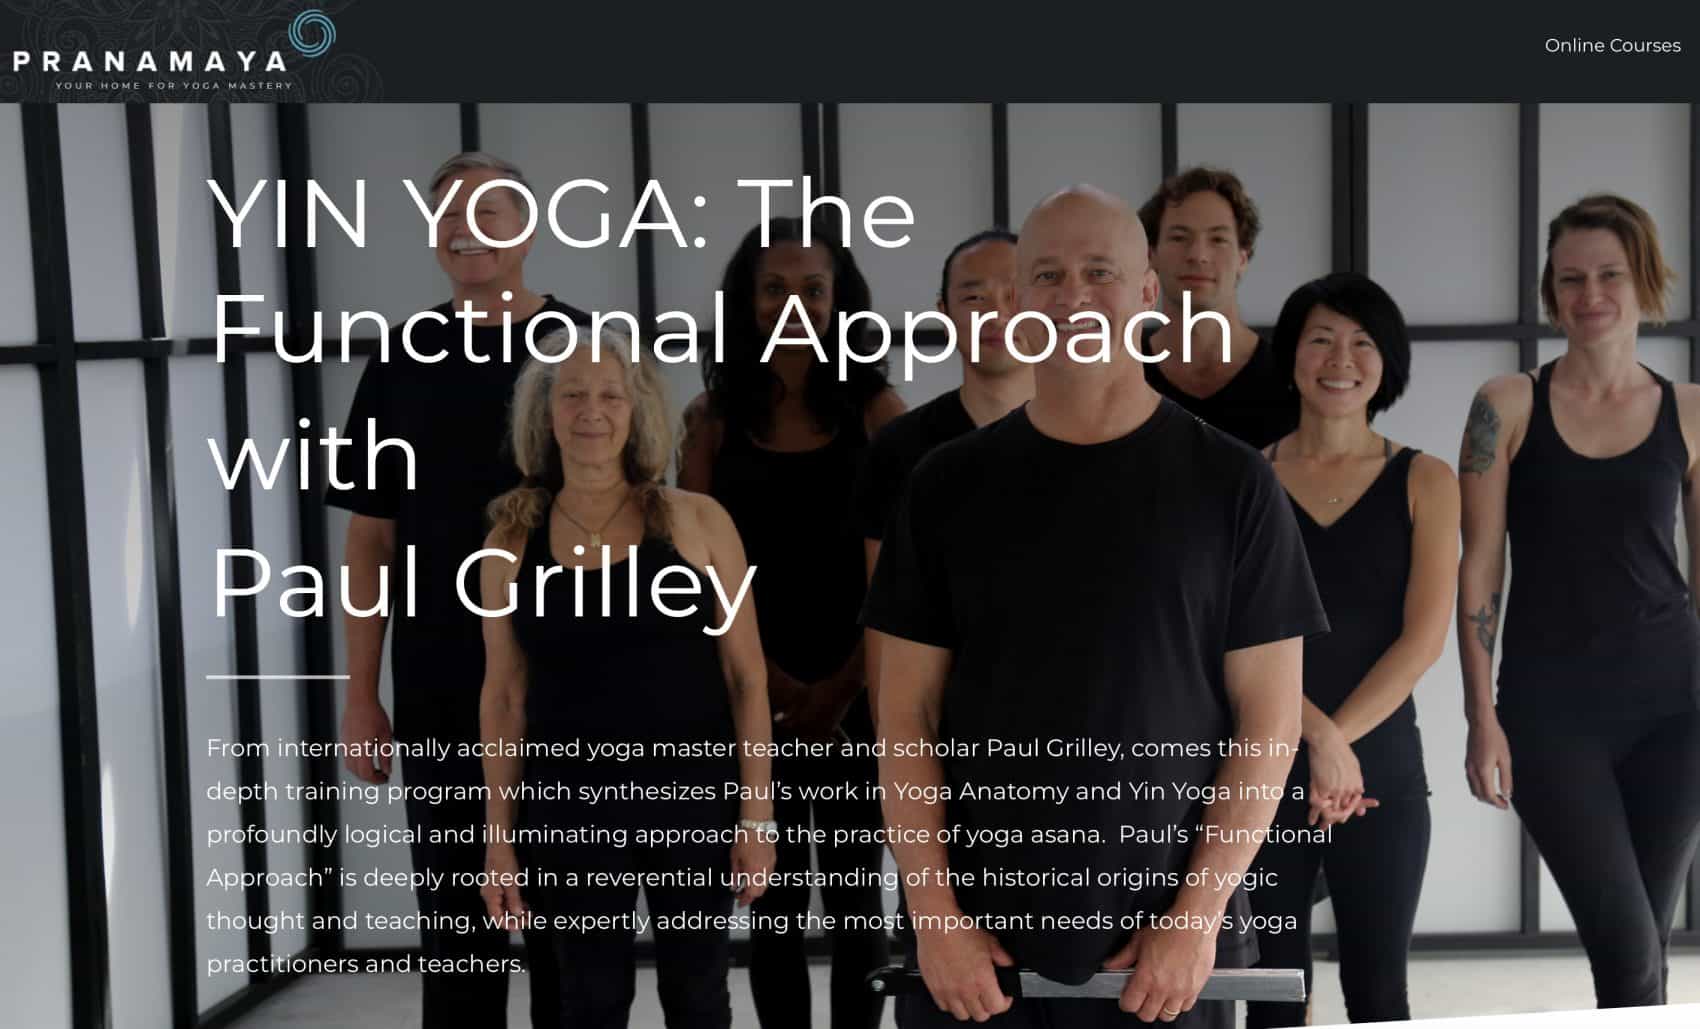 Paul Grilley and team dressed in black facing camera  Yoga Instructor Courses Online YTT Alliance certified